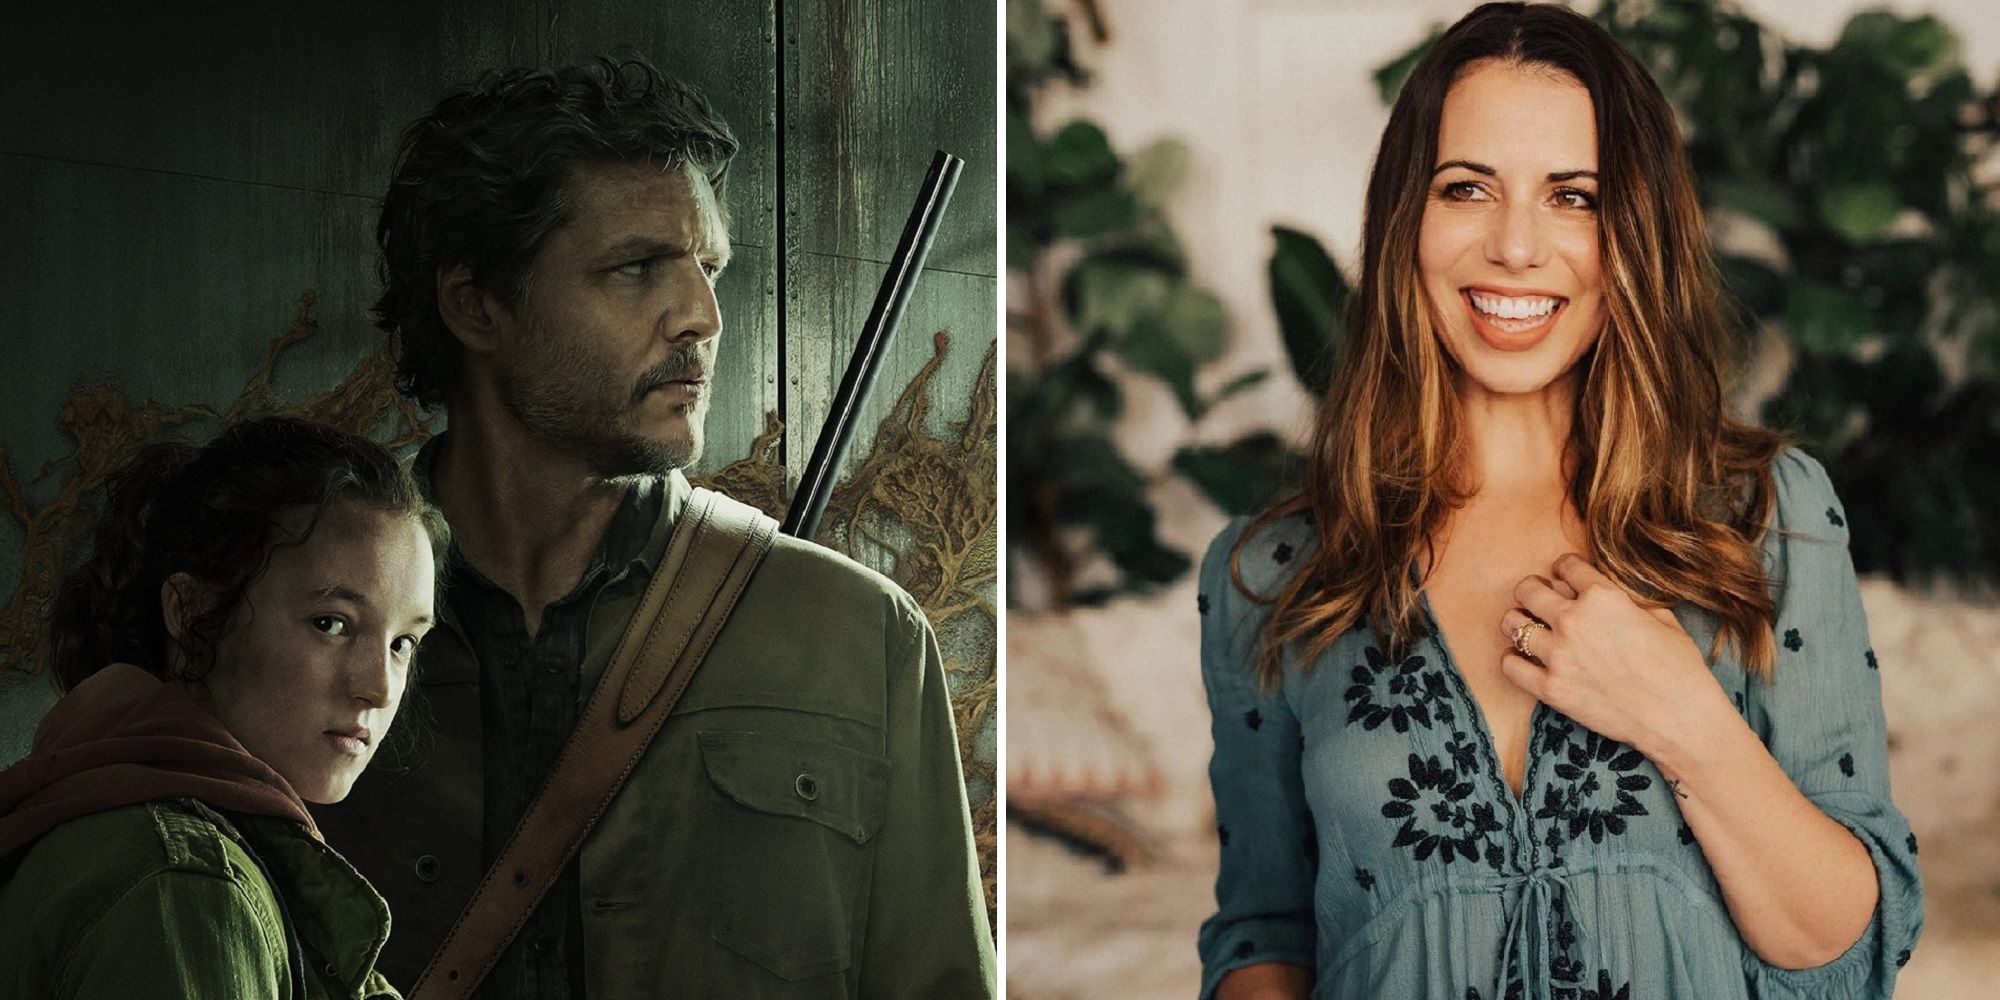 Who Does Laura Bailey Play in HBO's The Last of Us?